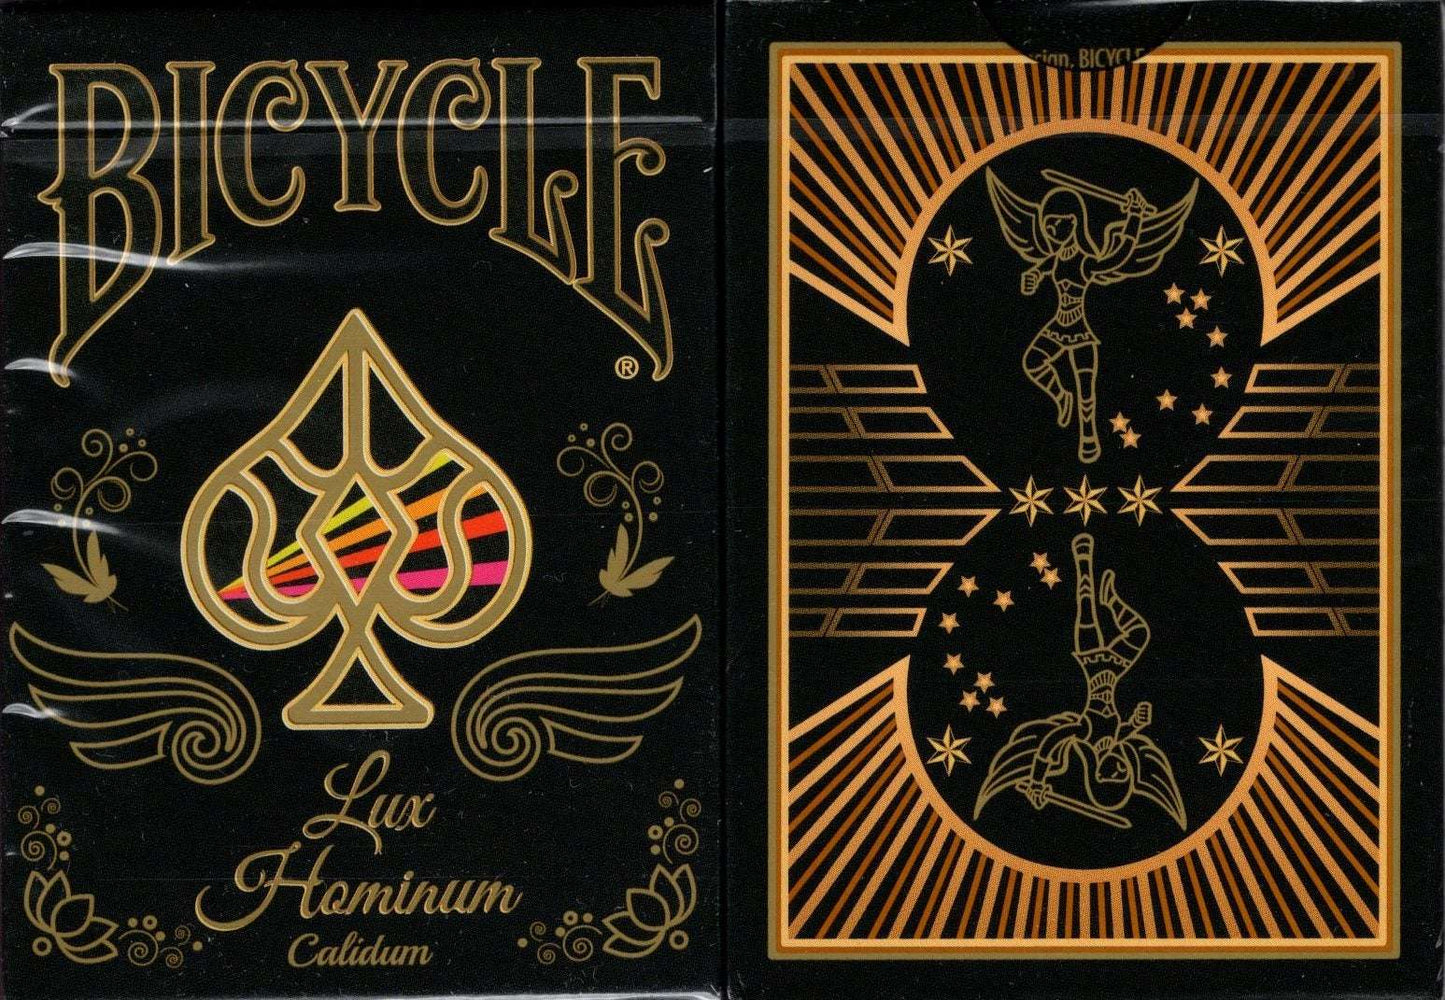 PlayingCardDecks.com-Lux Hominum Calidum Bicycle Playing Cards